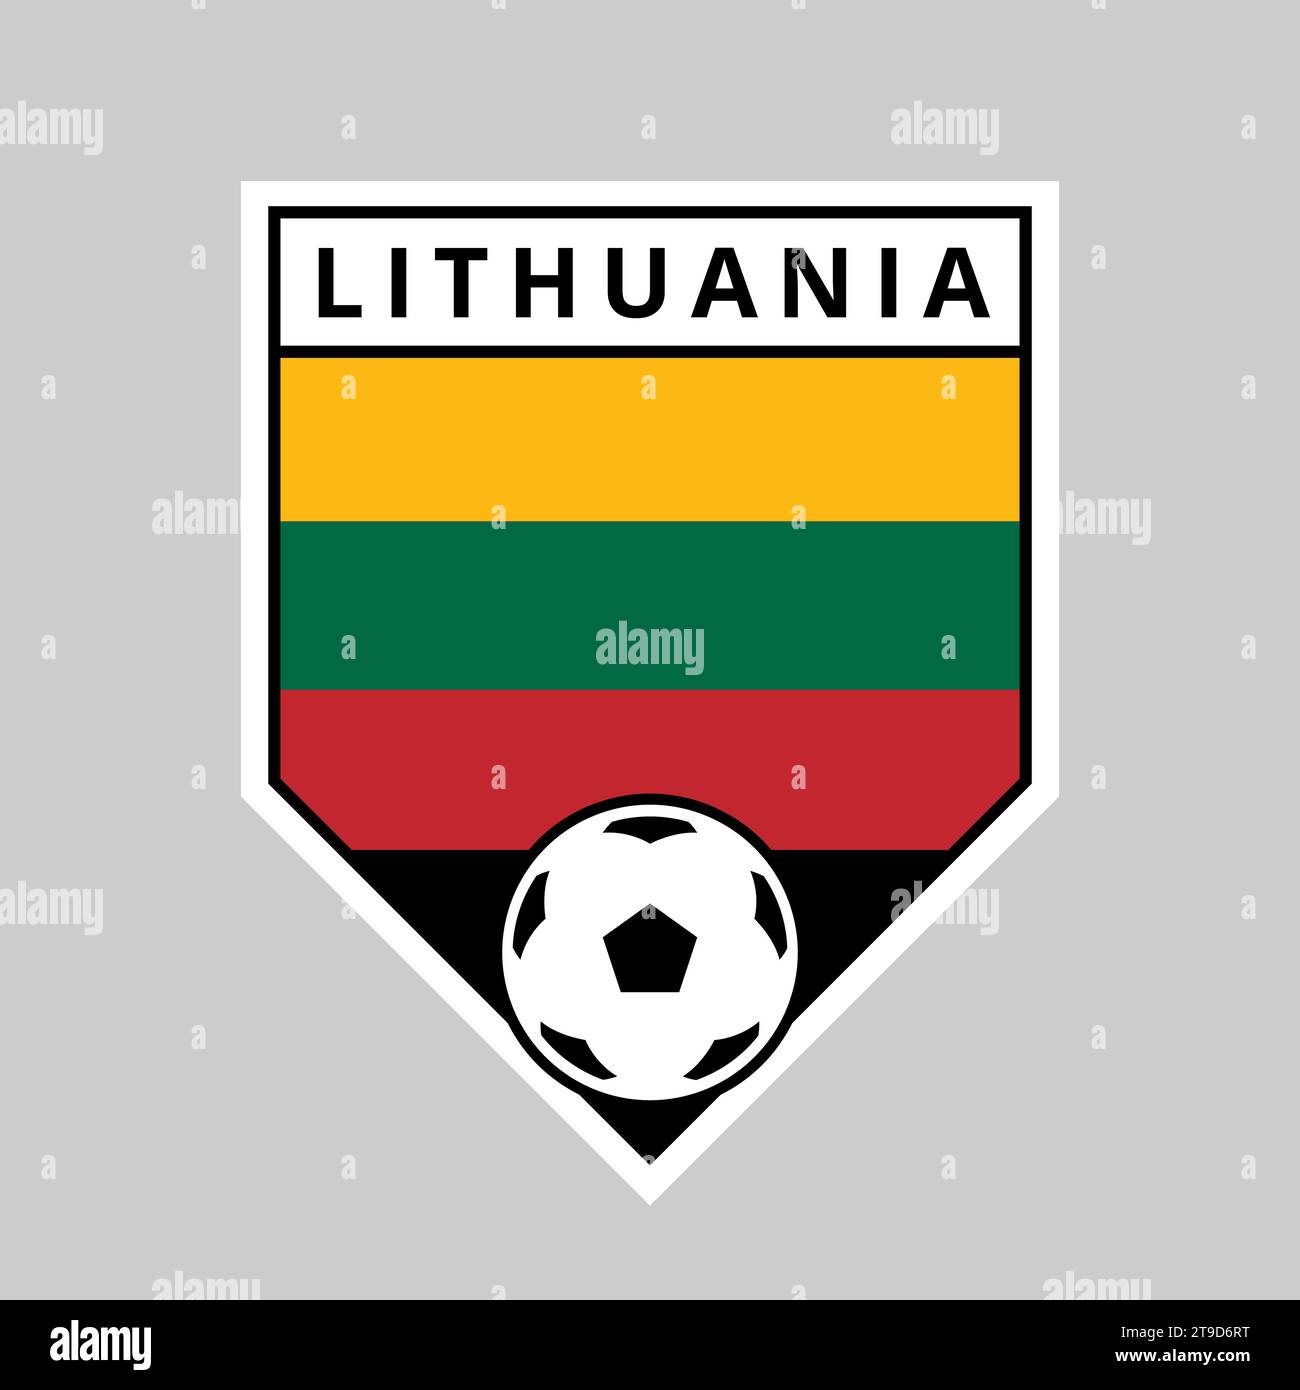 Illustration of Angled Shield Team Badge of Lithuania for Football Tournament Stock Vector